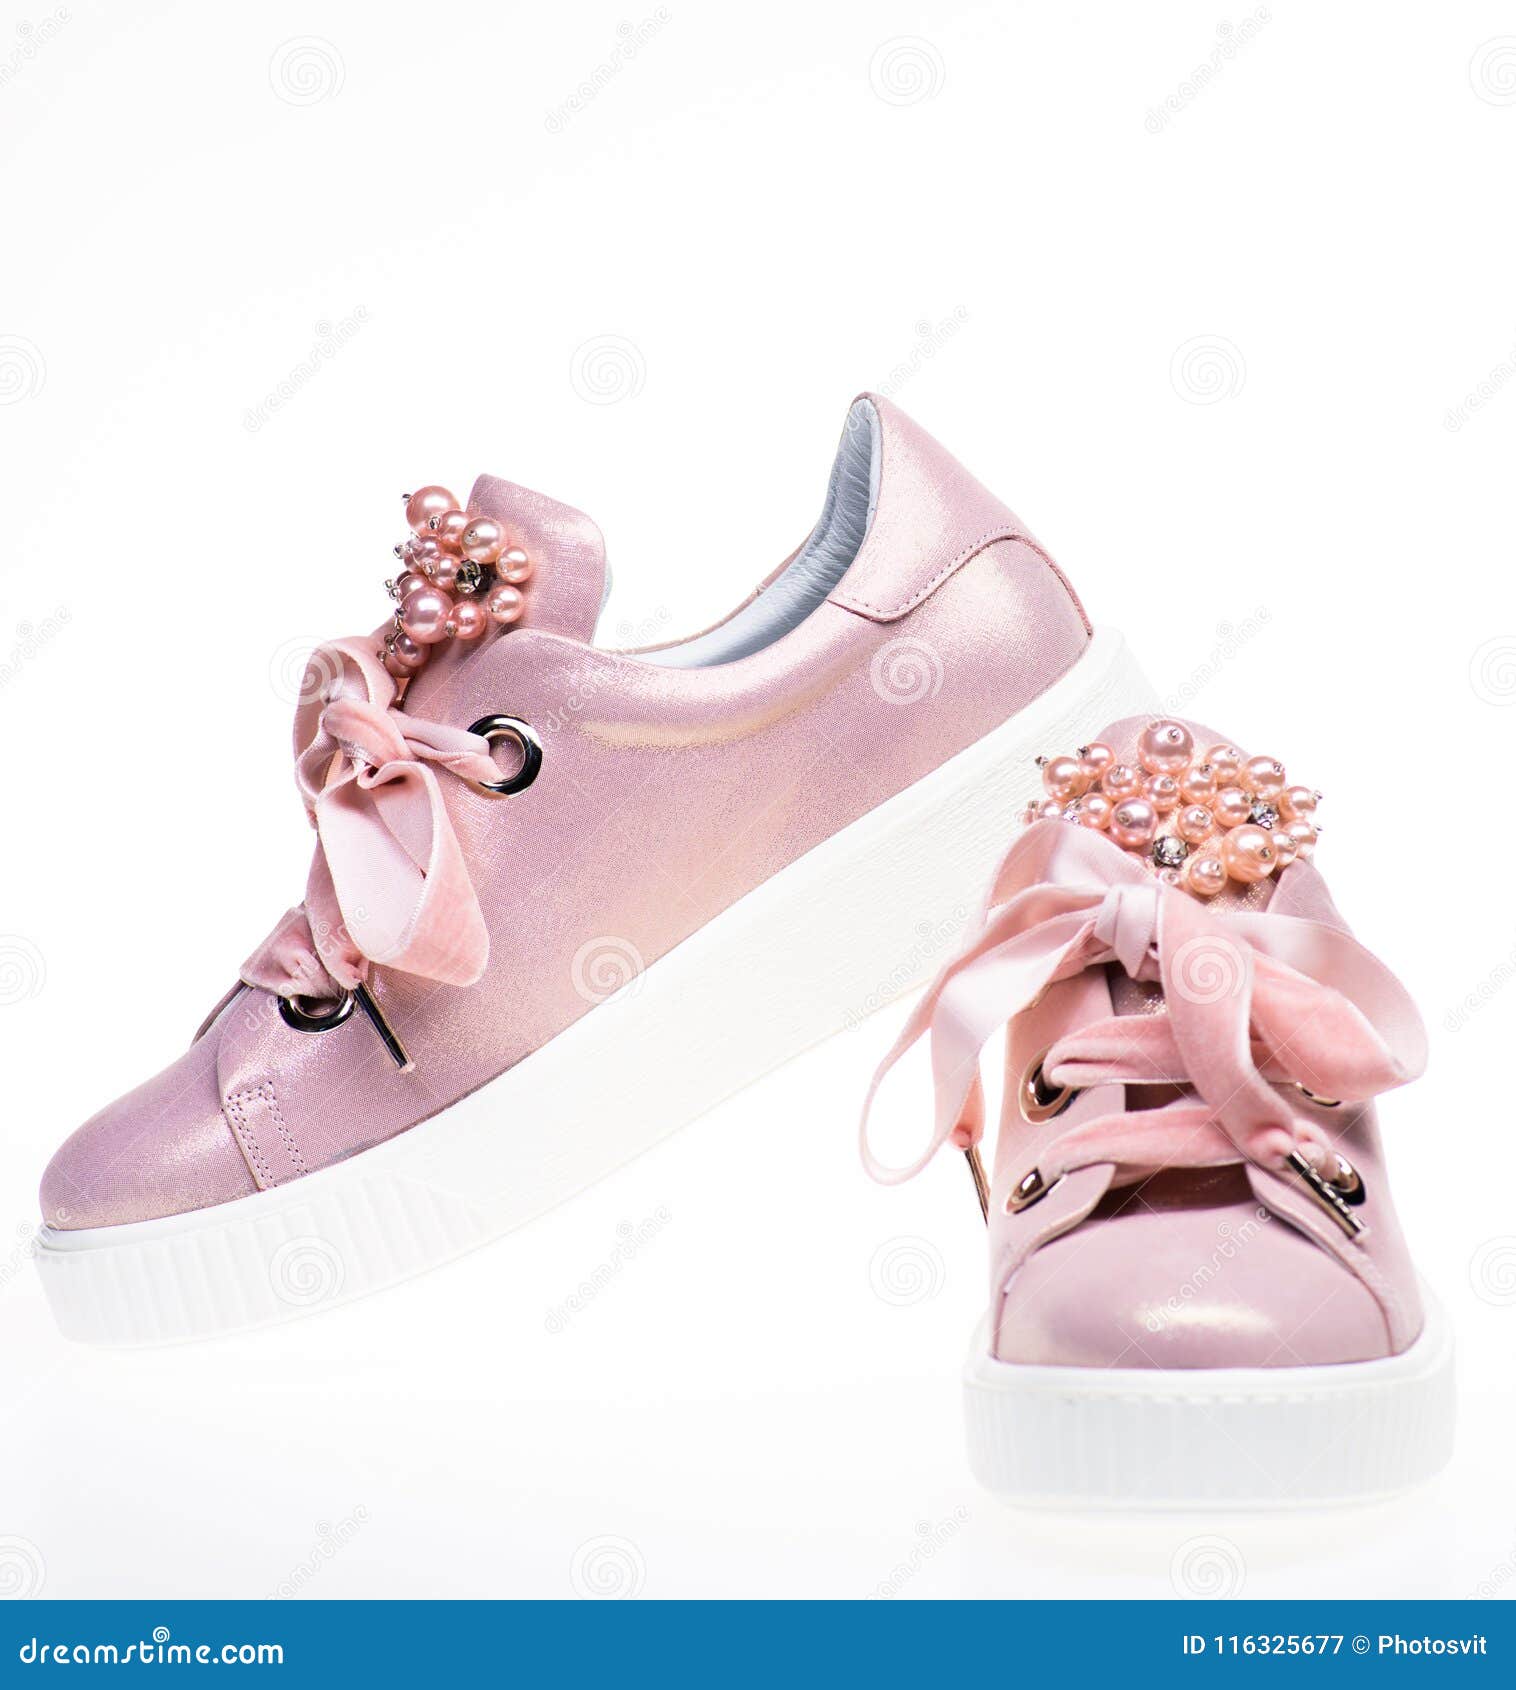 trendy sneakers for girls